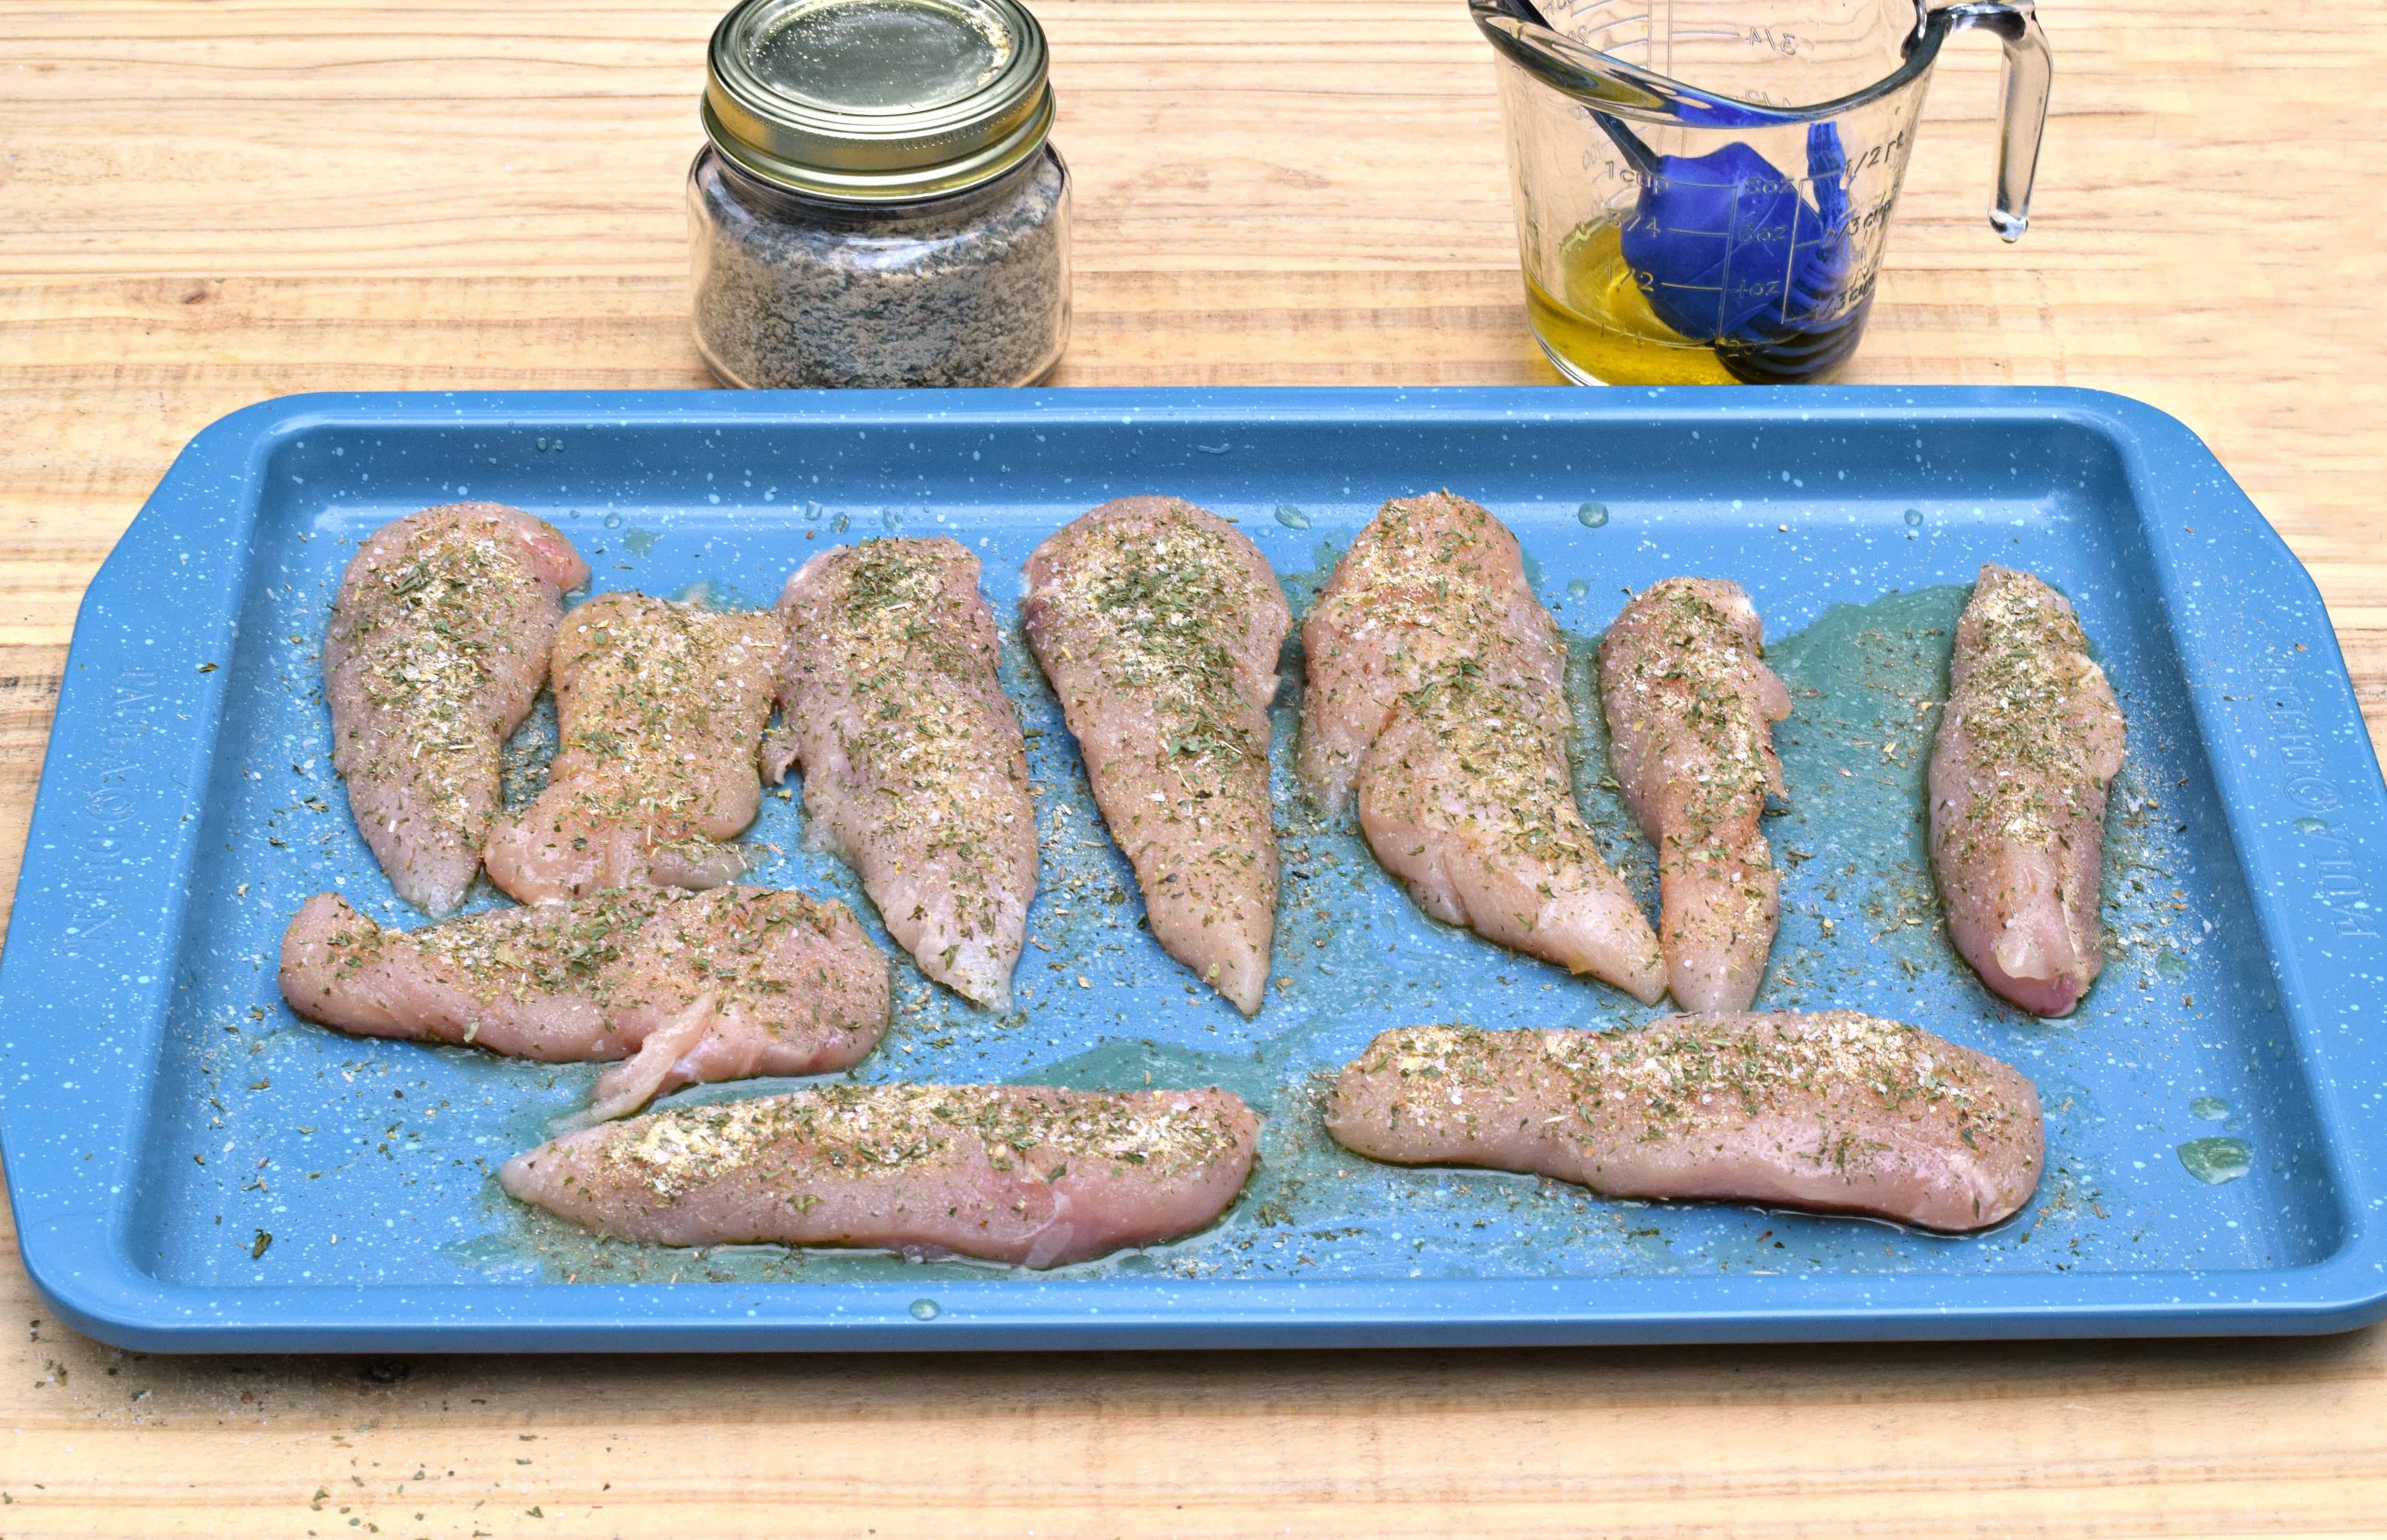 Place chicken on baking sheet, brush with oil, and cover with seasoning.